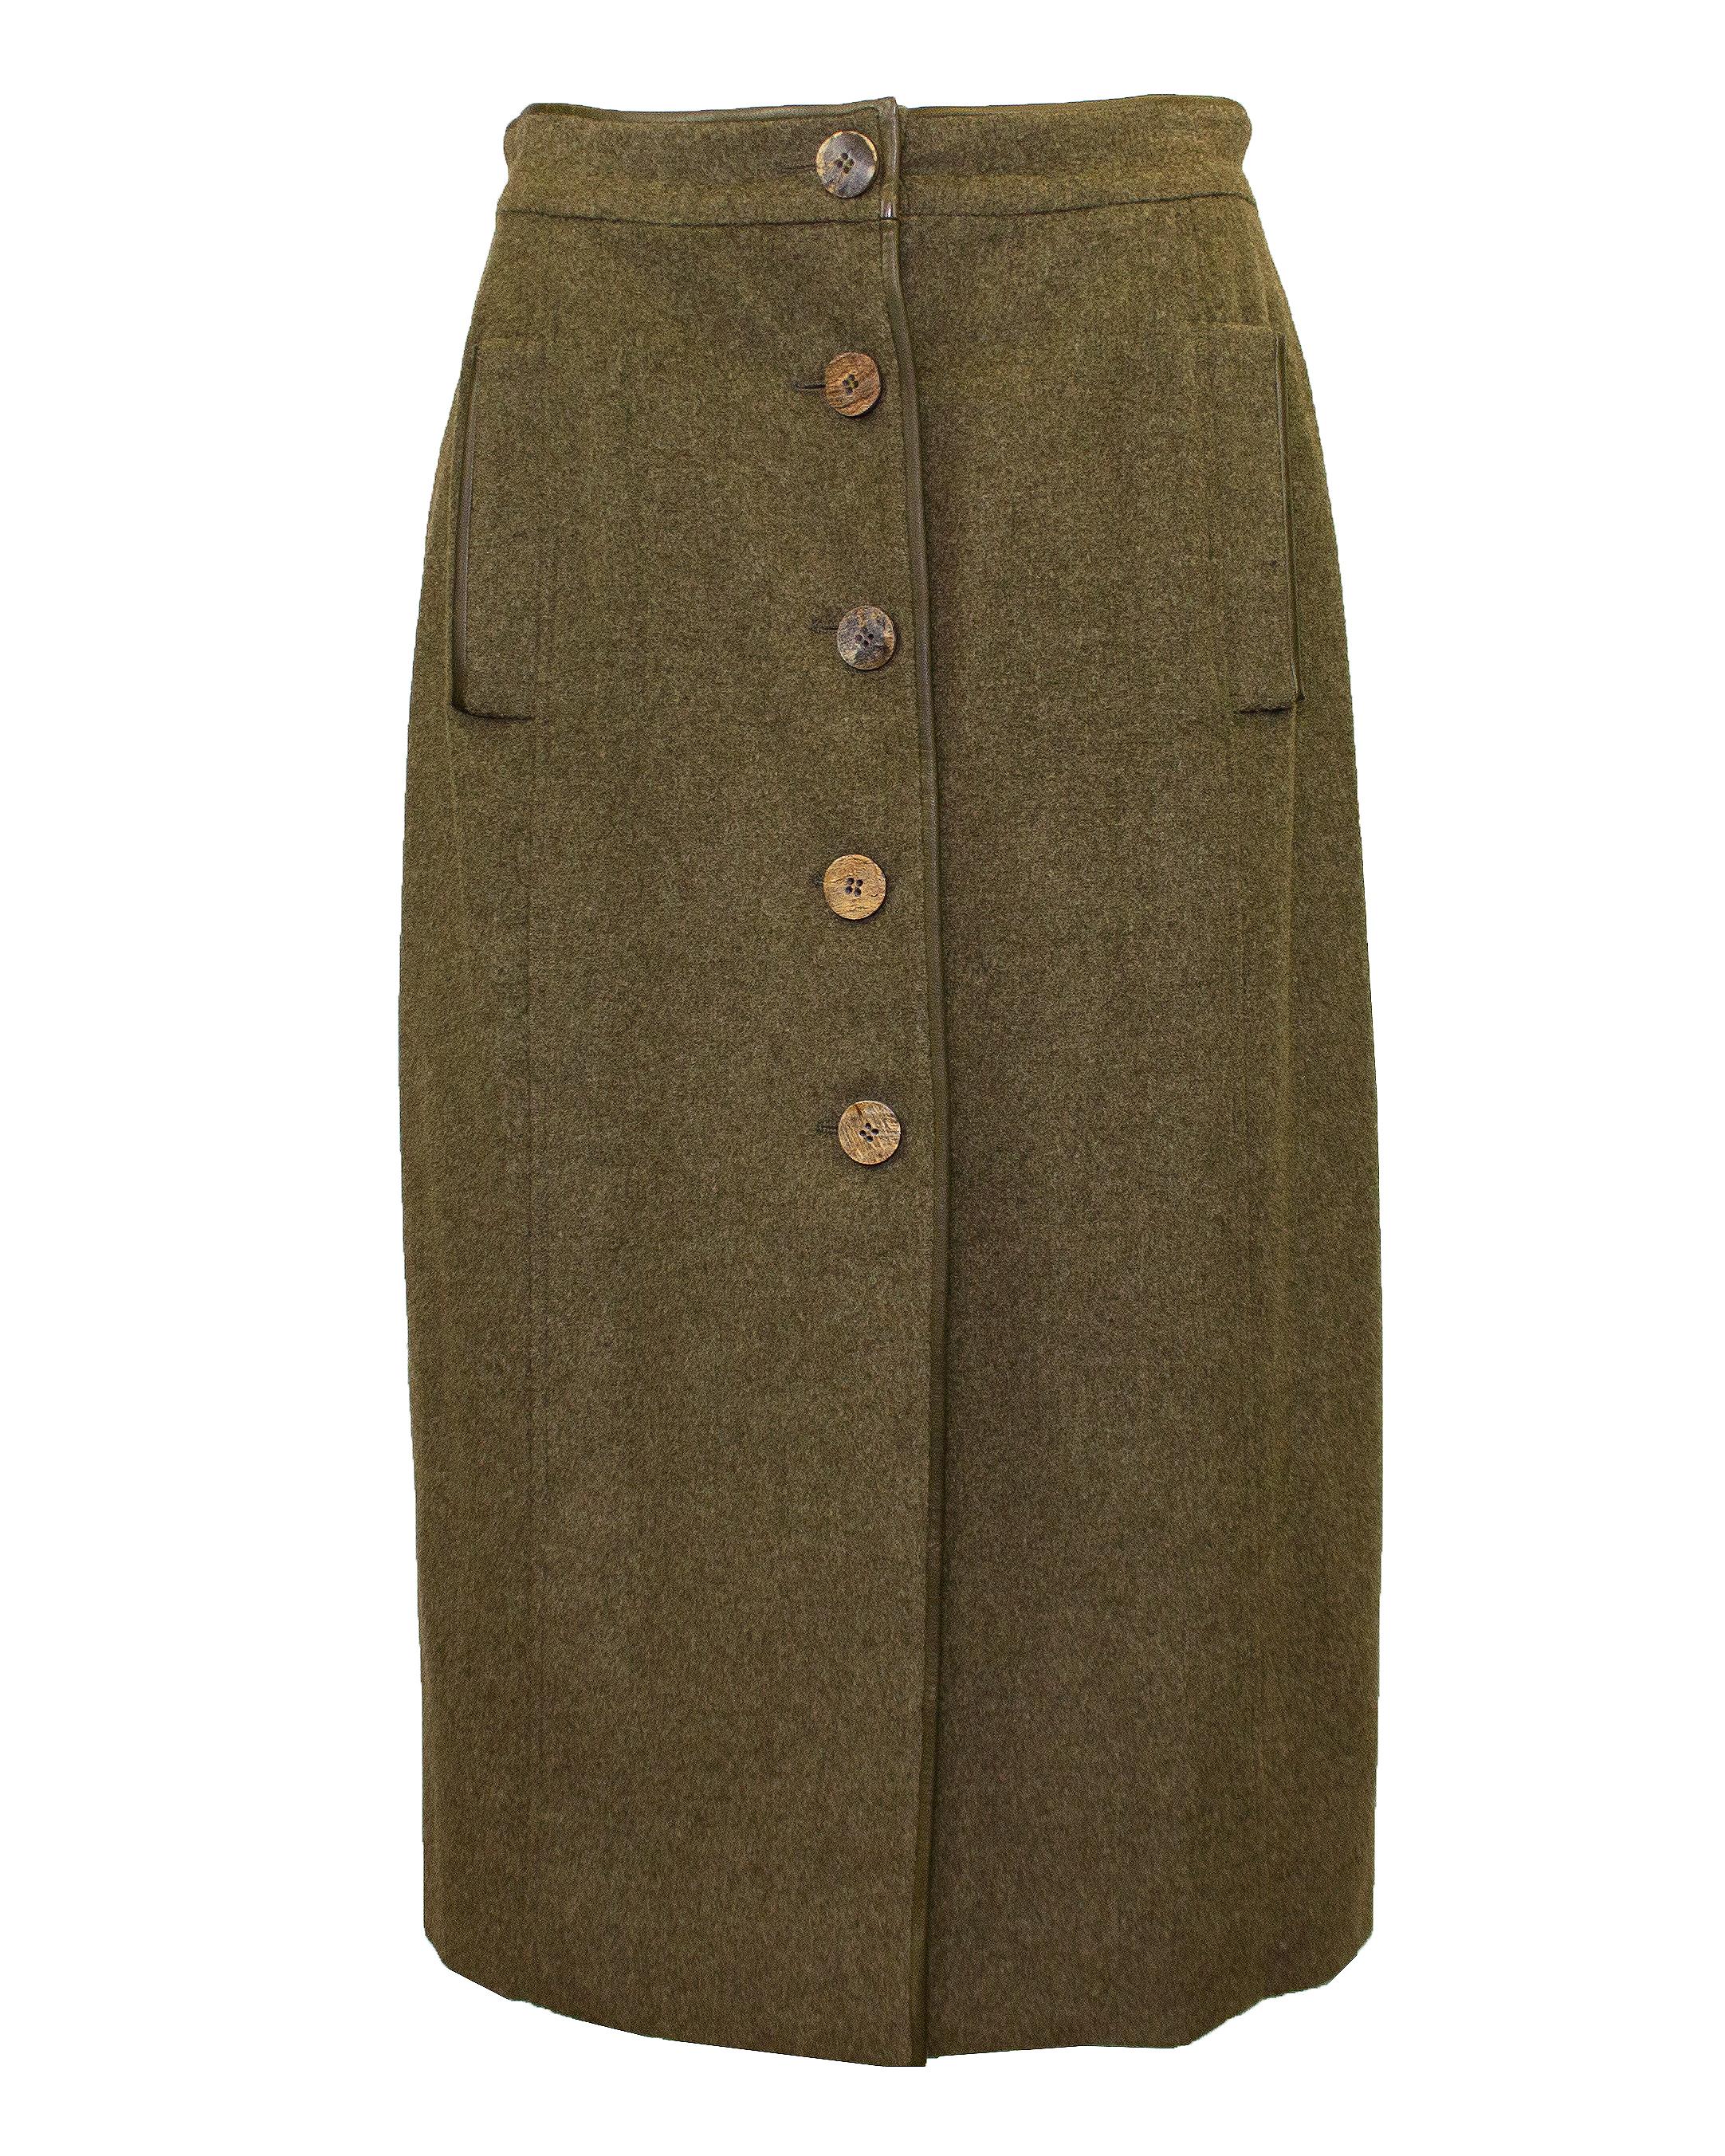 1980s Hermes Olive Green Wool and Cashmere Jacket and Skirt Ensemble  For Sale 3